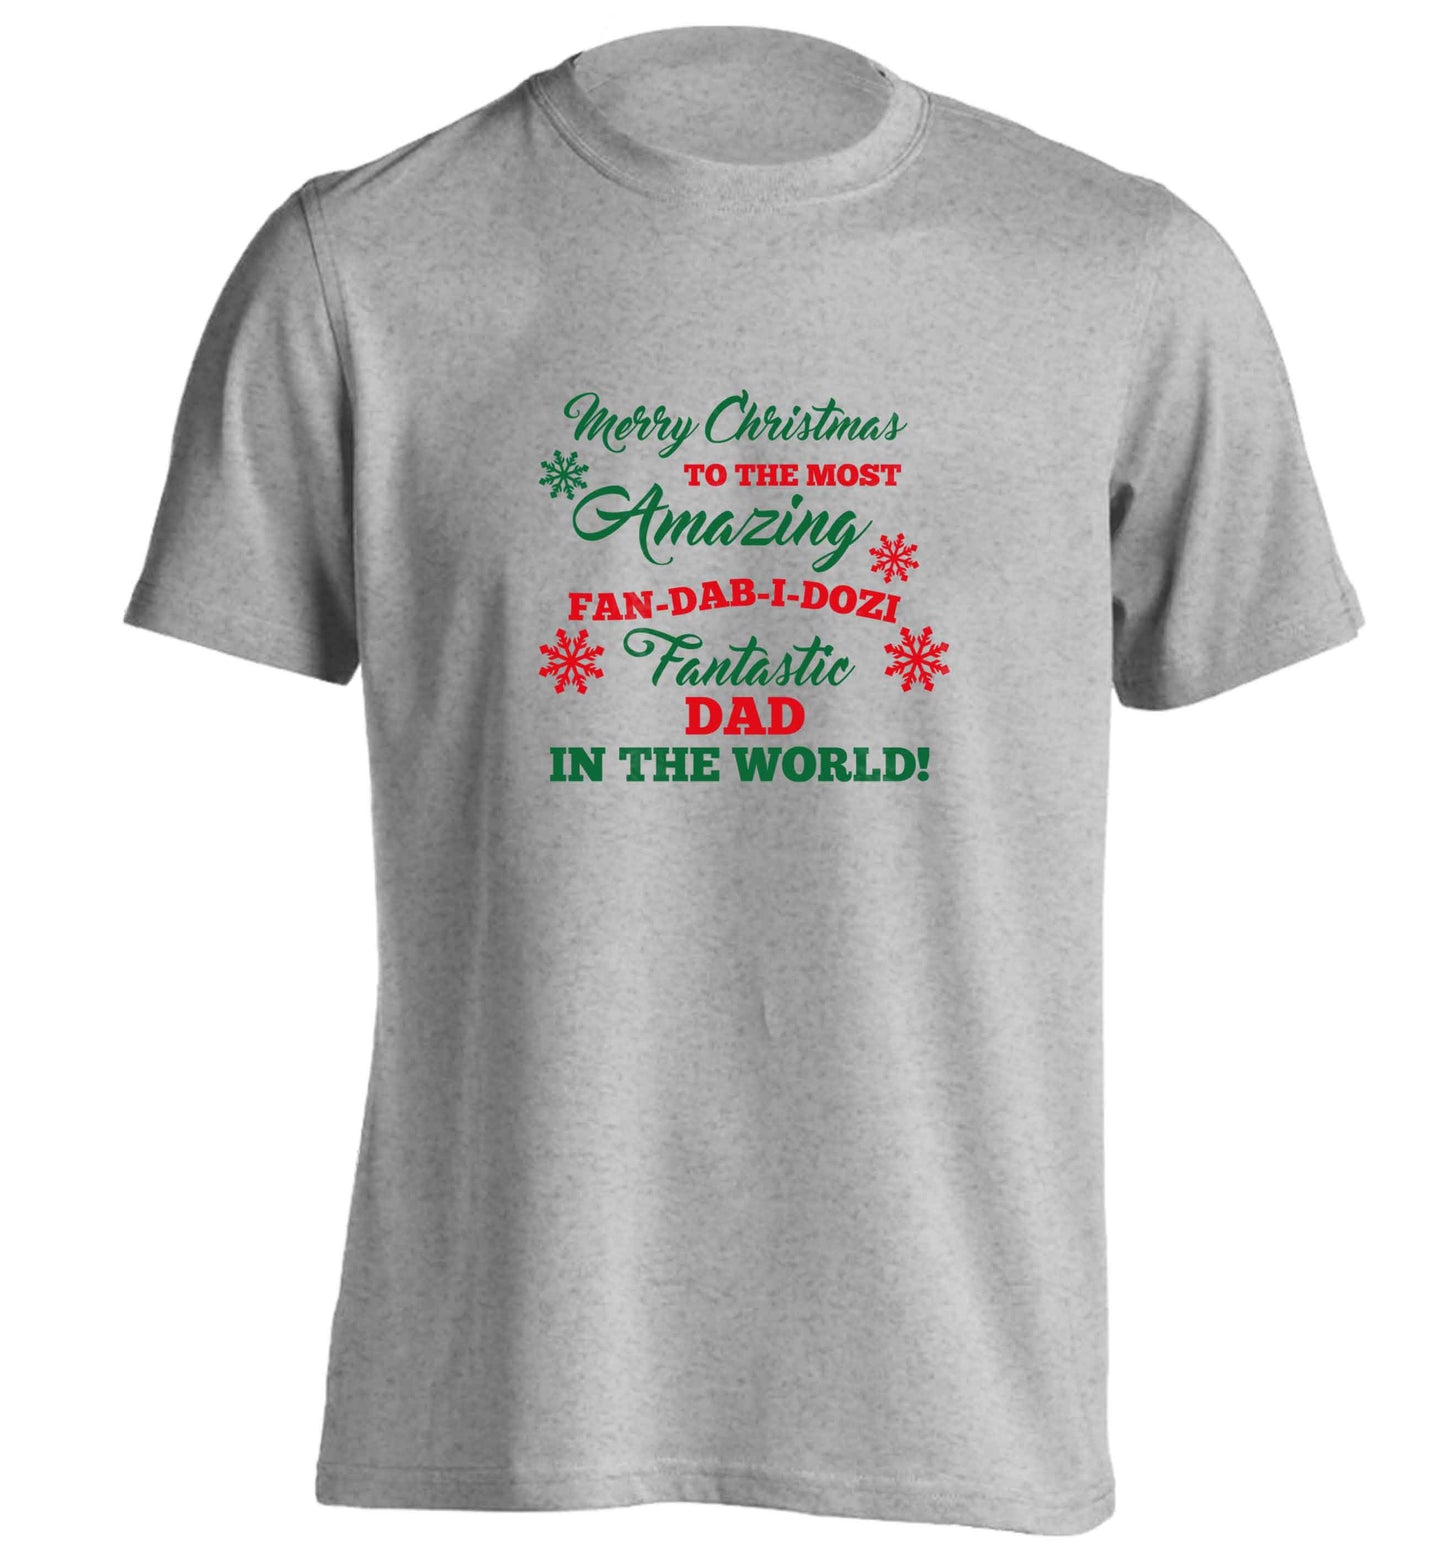 Merry Christmas to the most amazing fan-dab-i-dozi fantasic Dad in the world adults unisex grey Tshirt 2XL